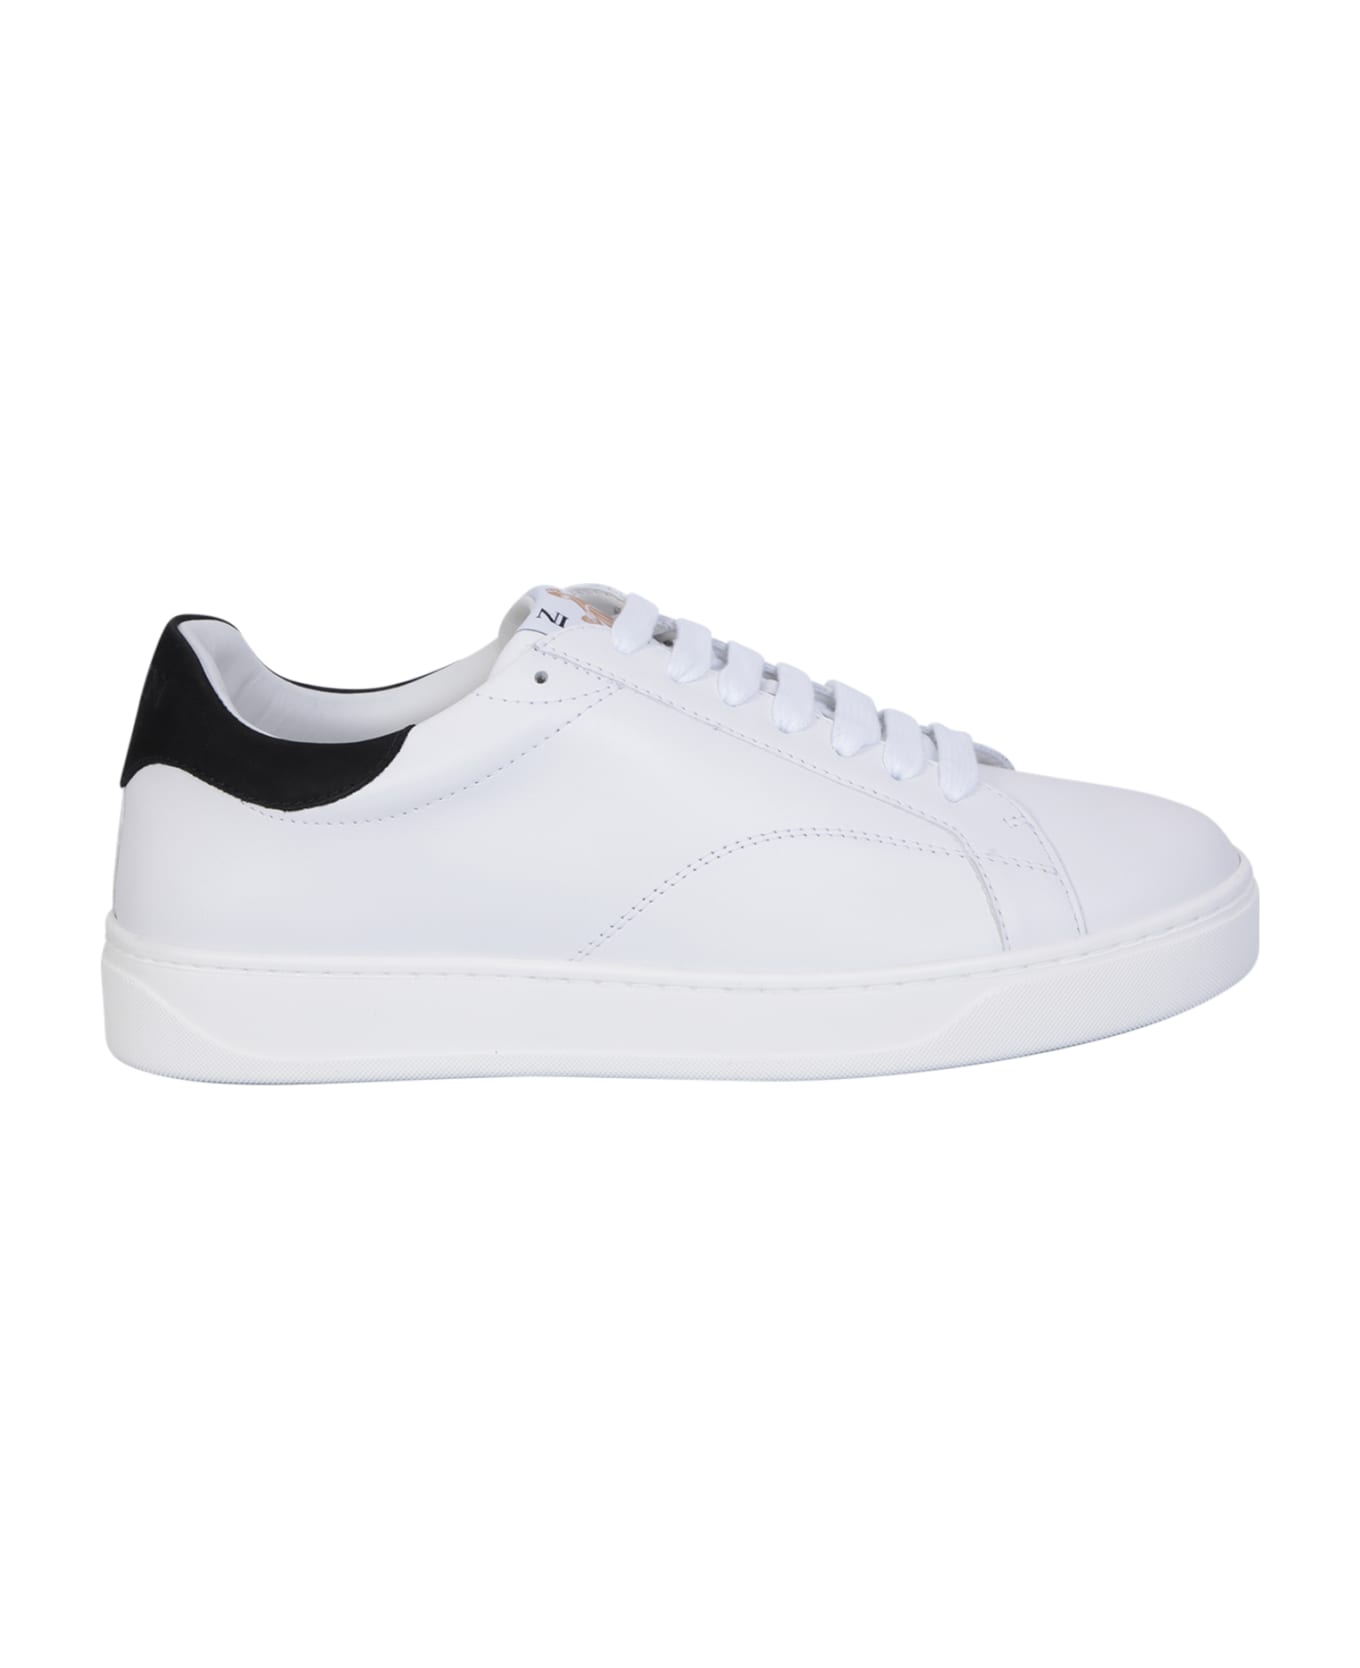 Lanvin White And Black Ddb0 Sneakers - Bianco